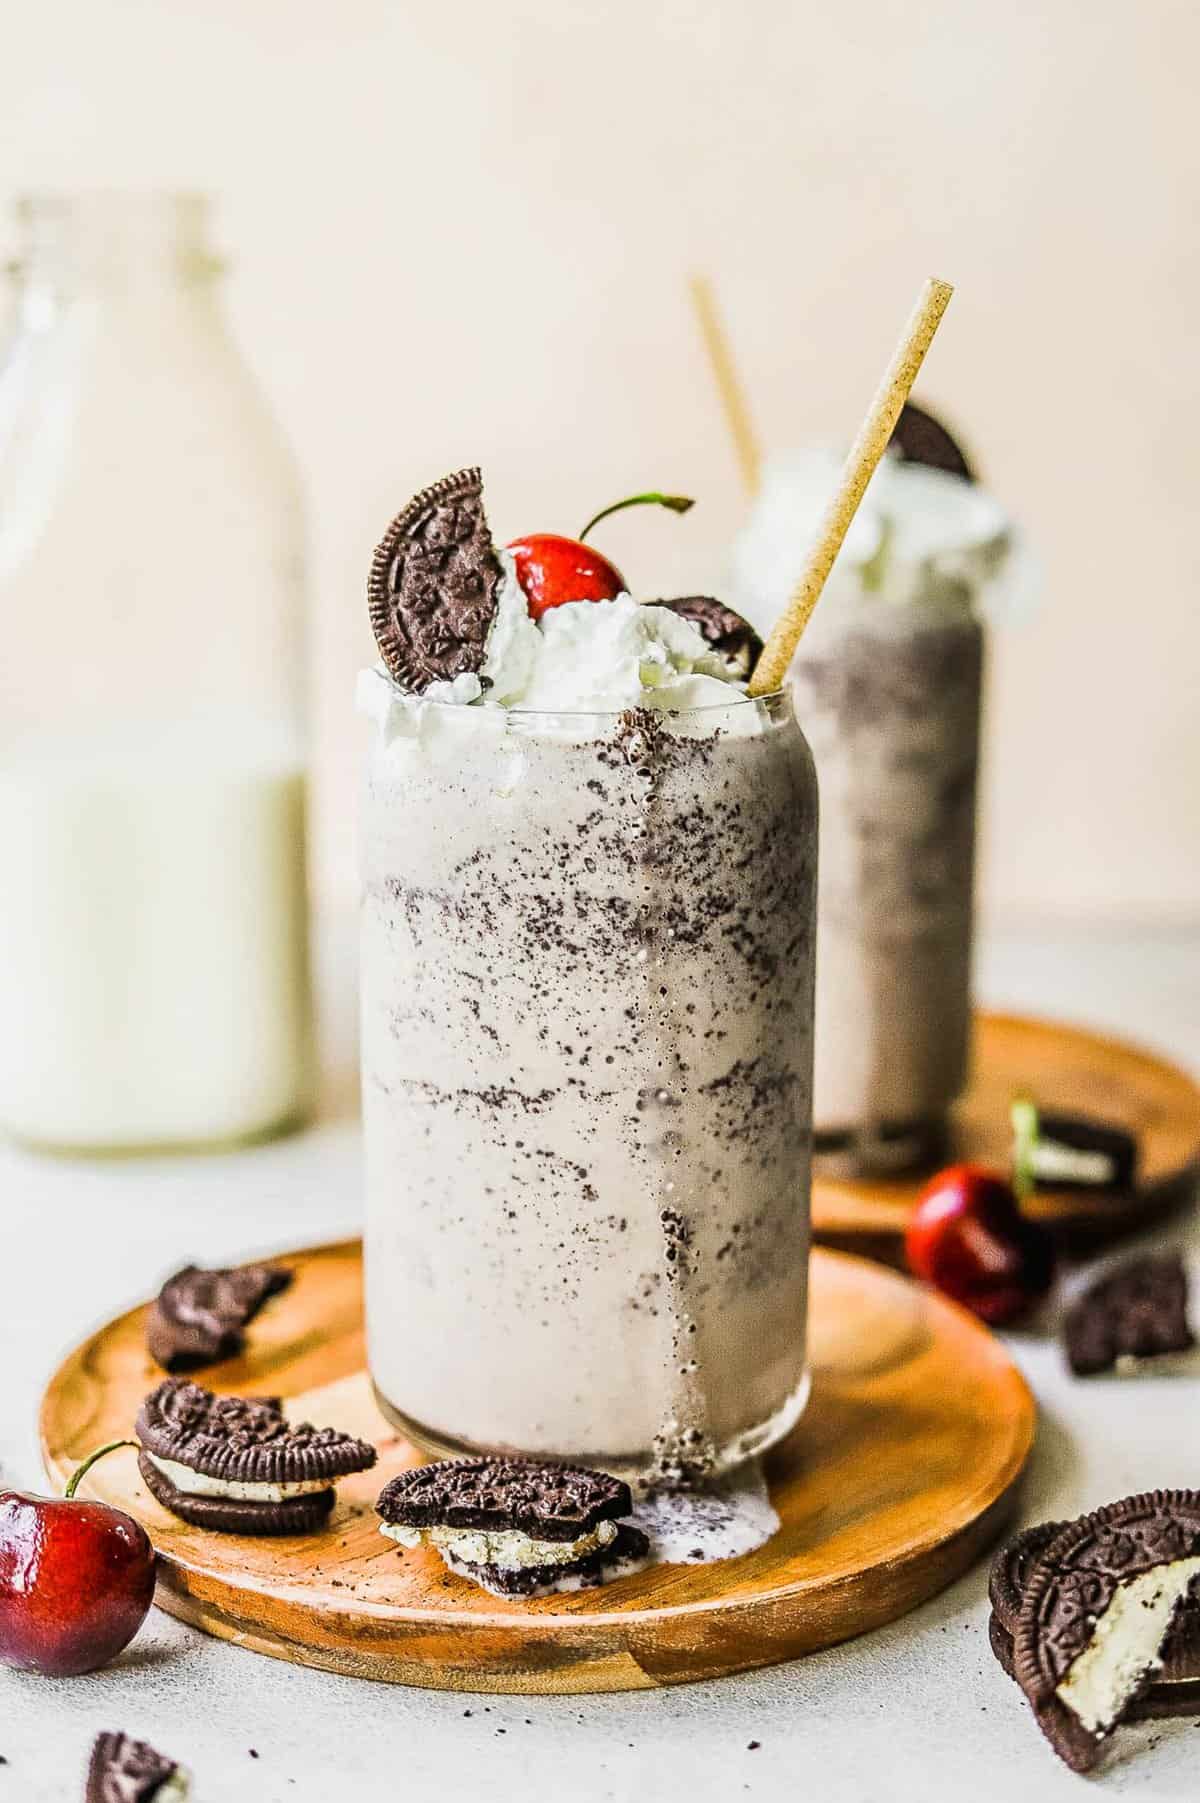 How To Make Cookies And Cream Milk Shake: A Delicious Recipe